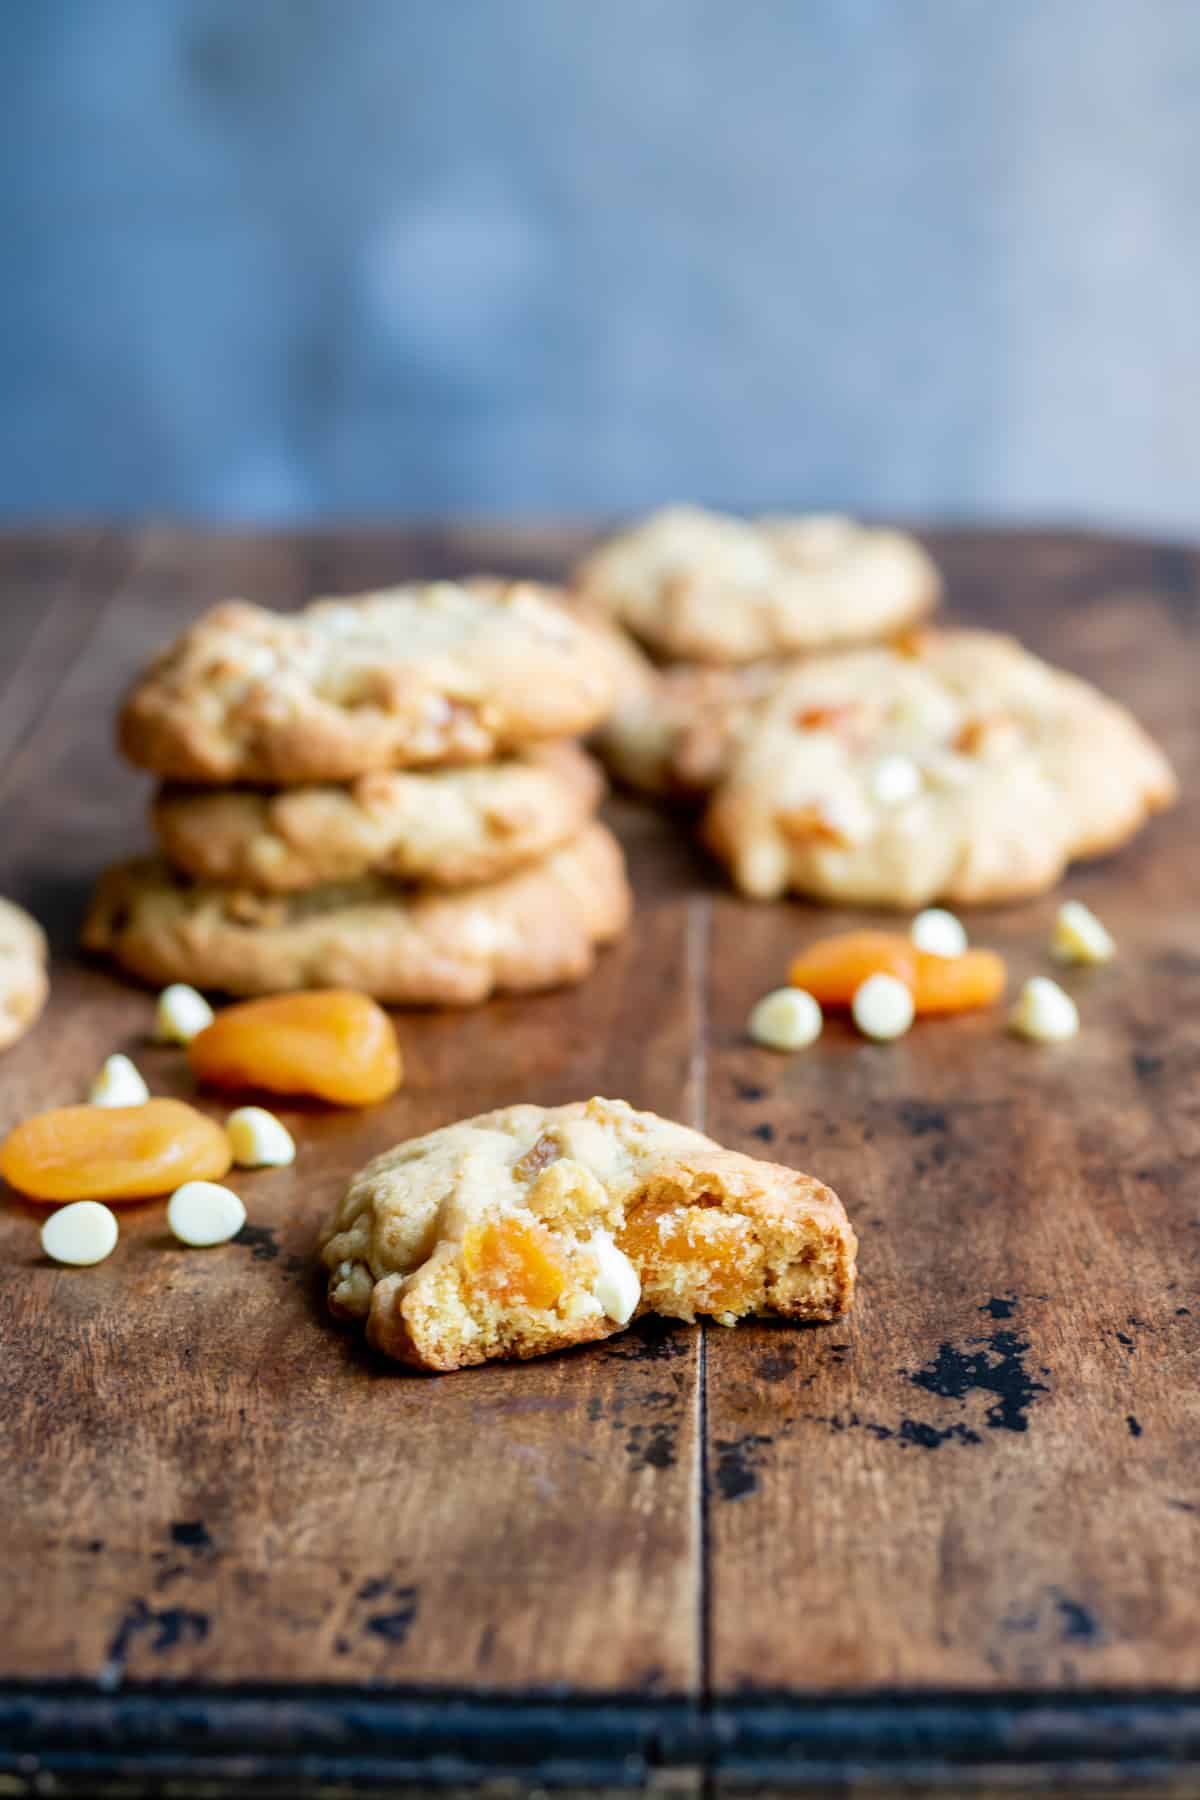 An apricot cookie with a bite out in front of more cookies, on a wooden table.